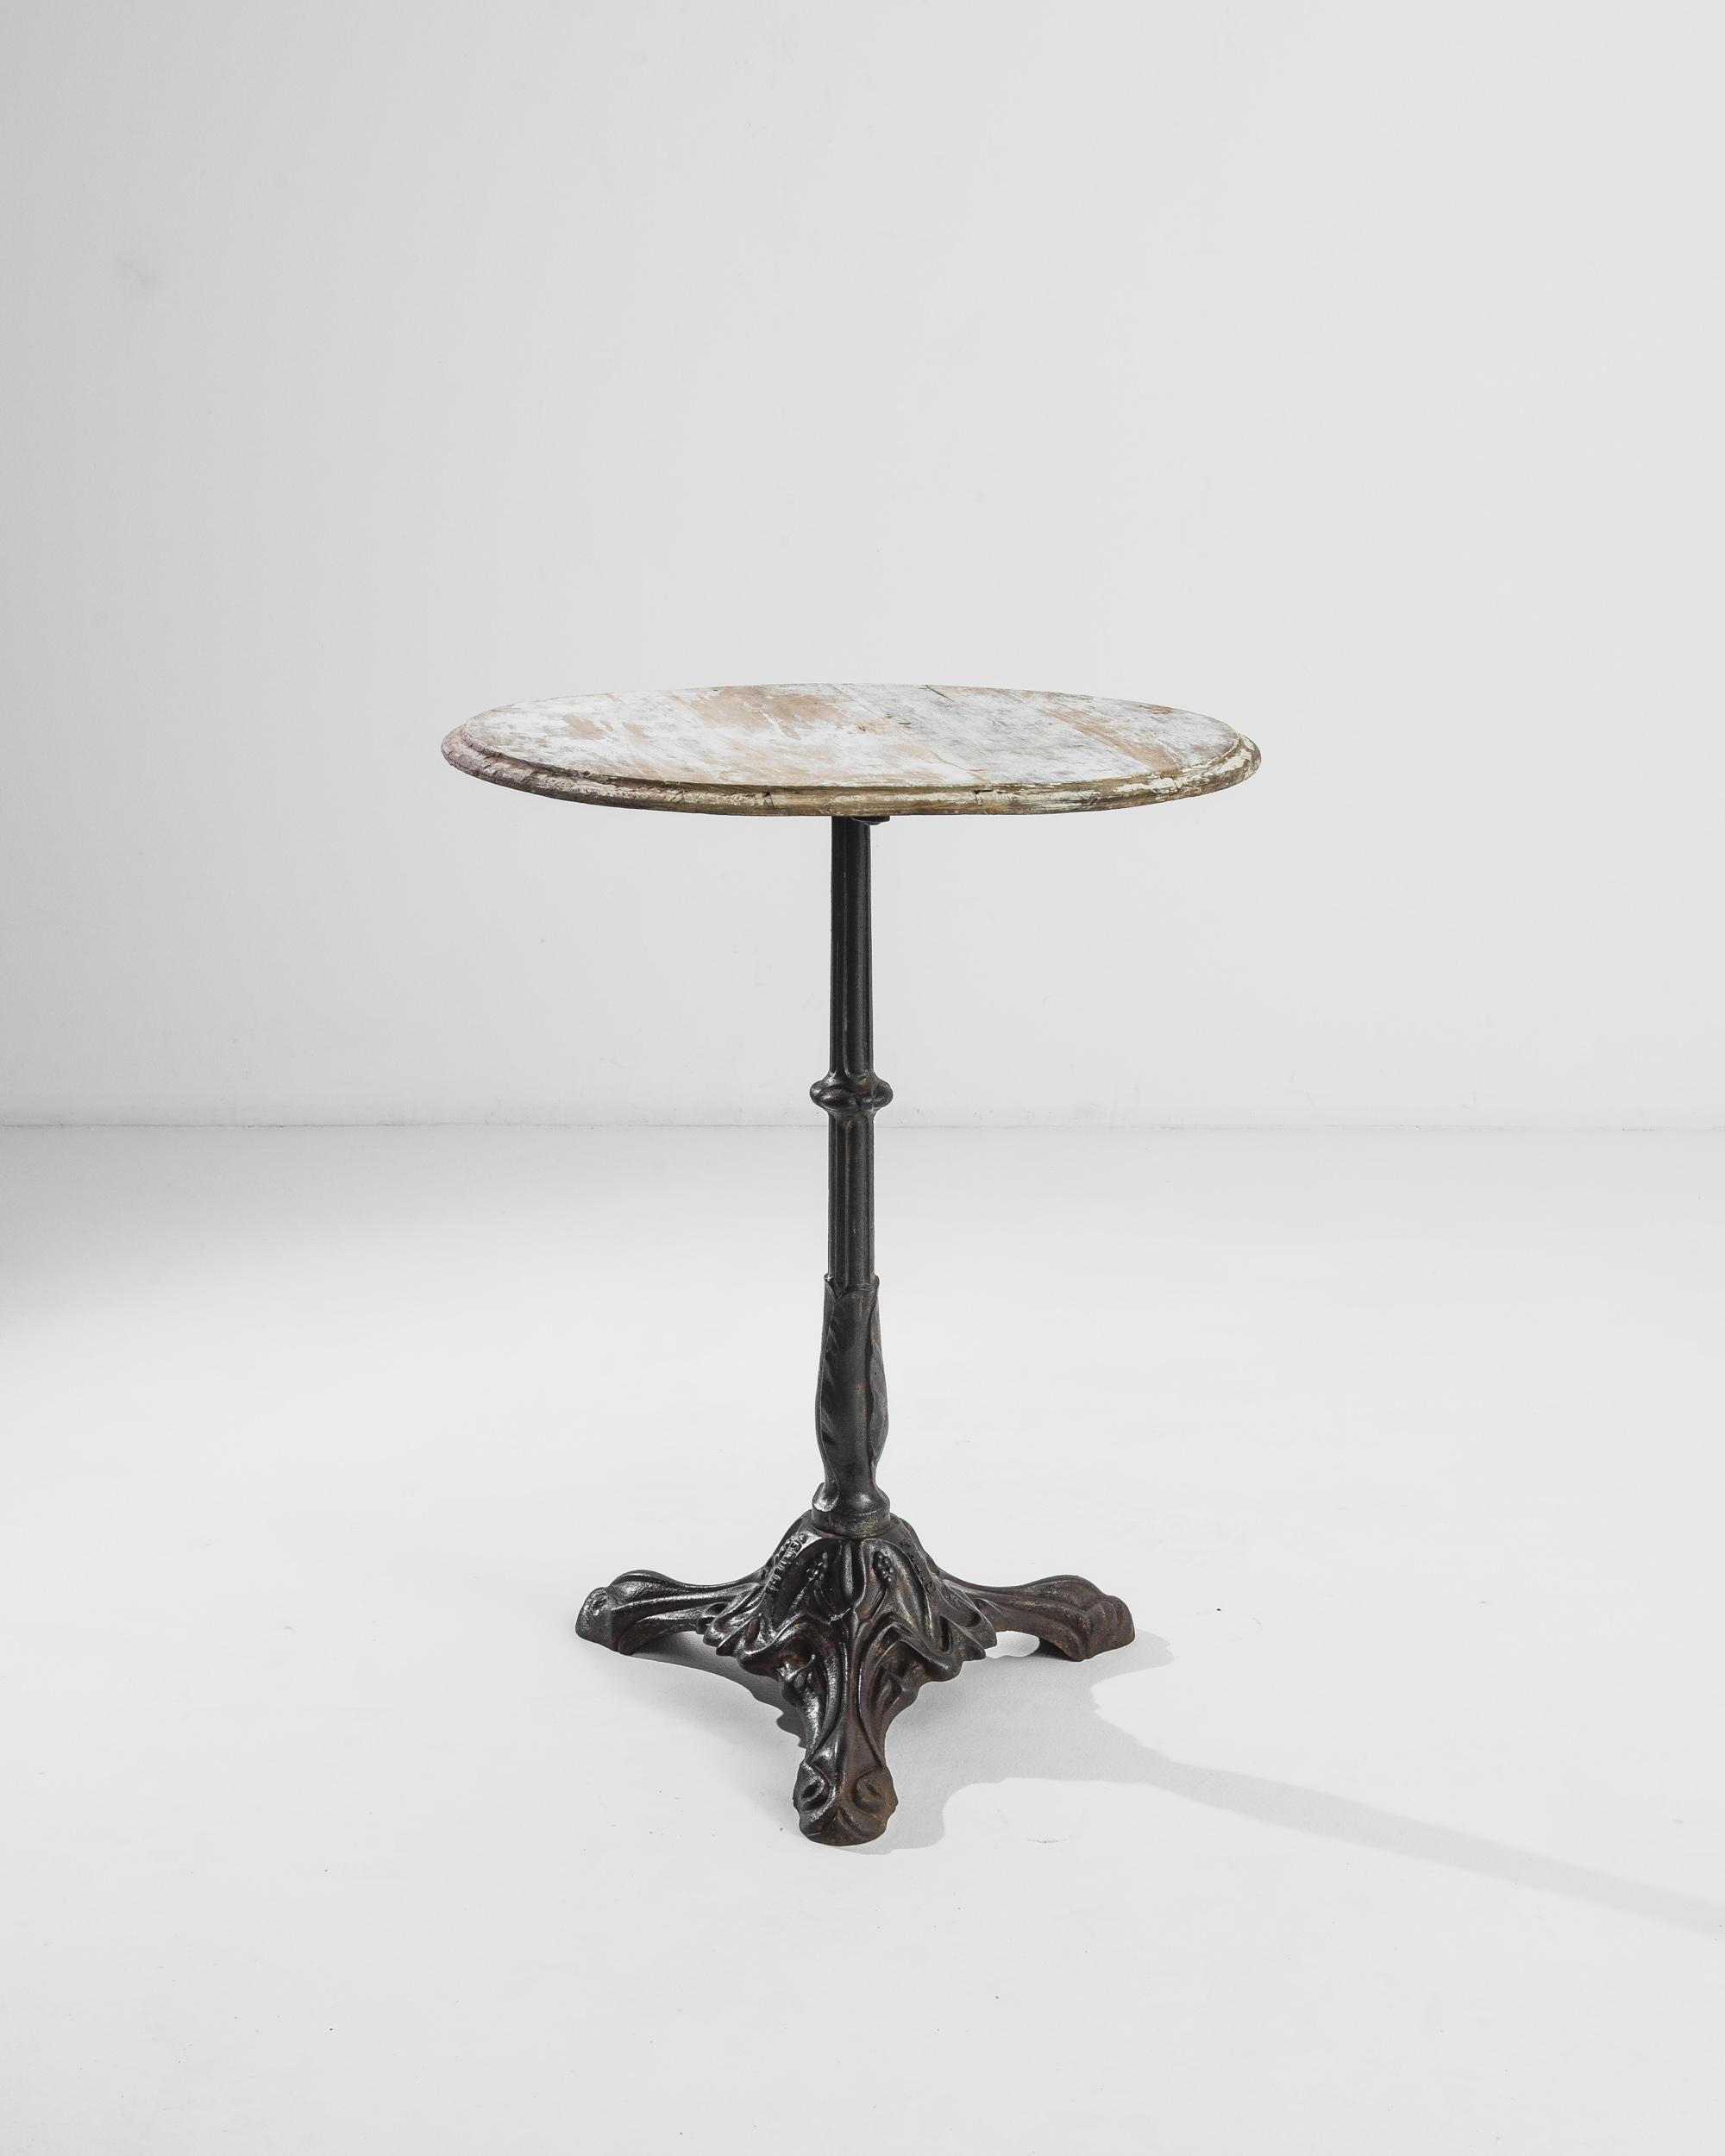 This circular bistro table from turn of the century France provides a delightful fragment of design history. The metal base draws inspiration from the iron pavilions of the Paris Exhibition, the event which introduced Art Nouveau to the world.